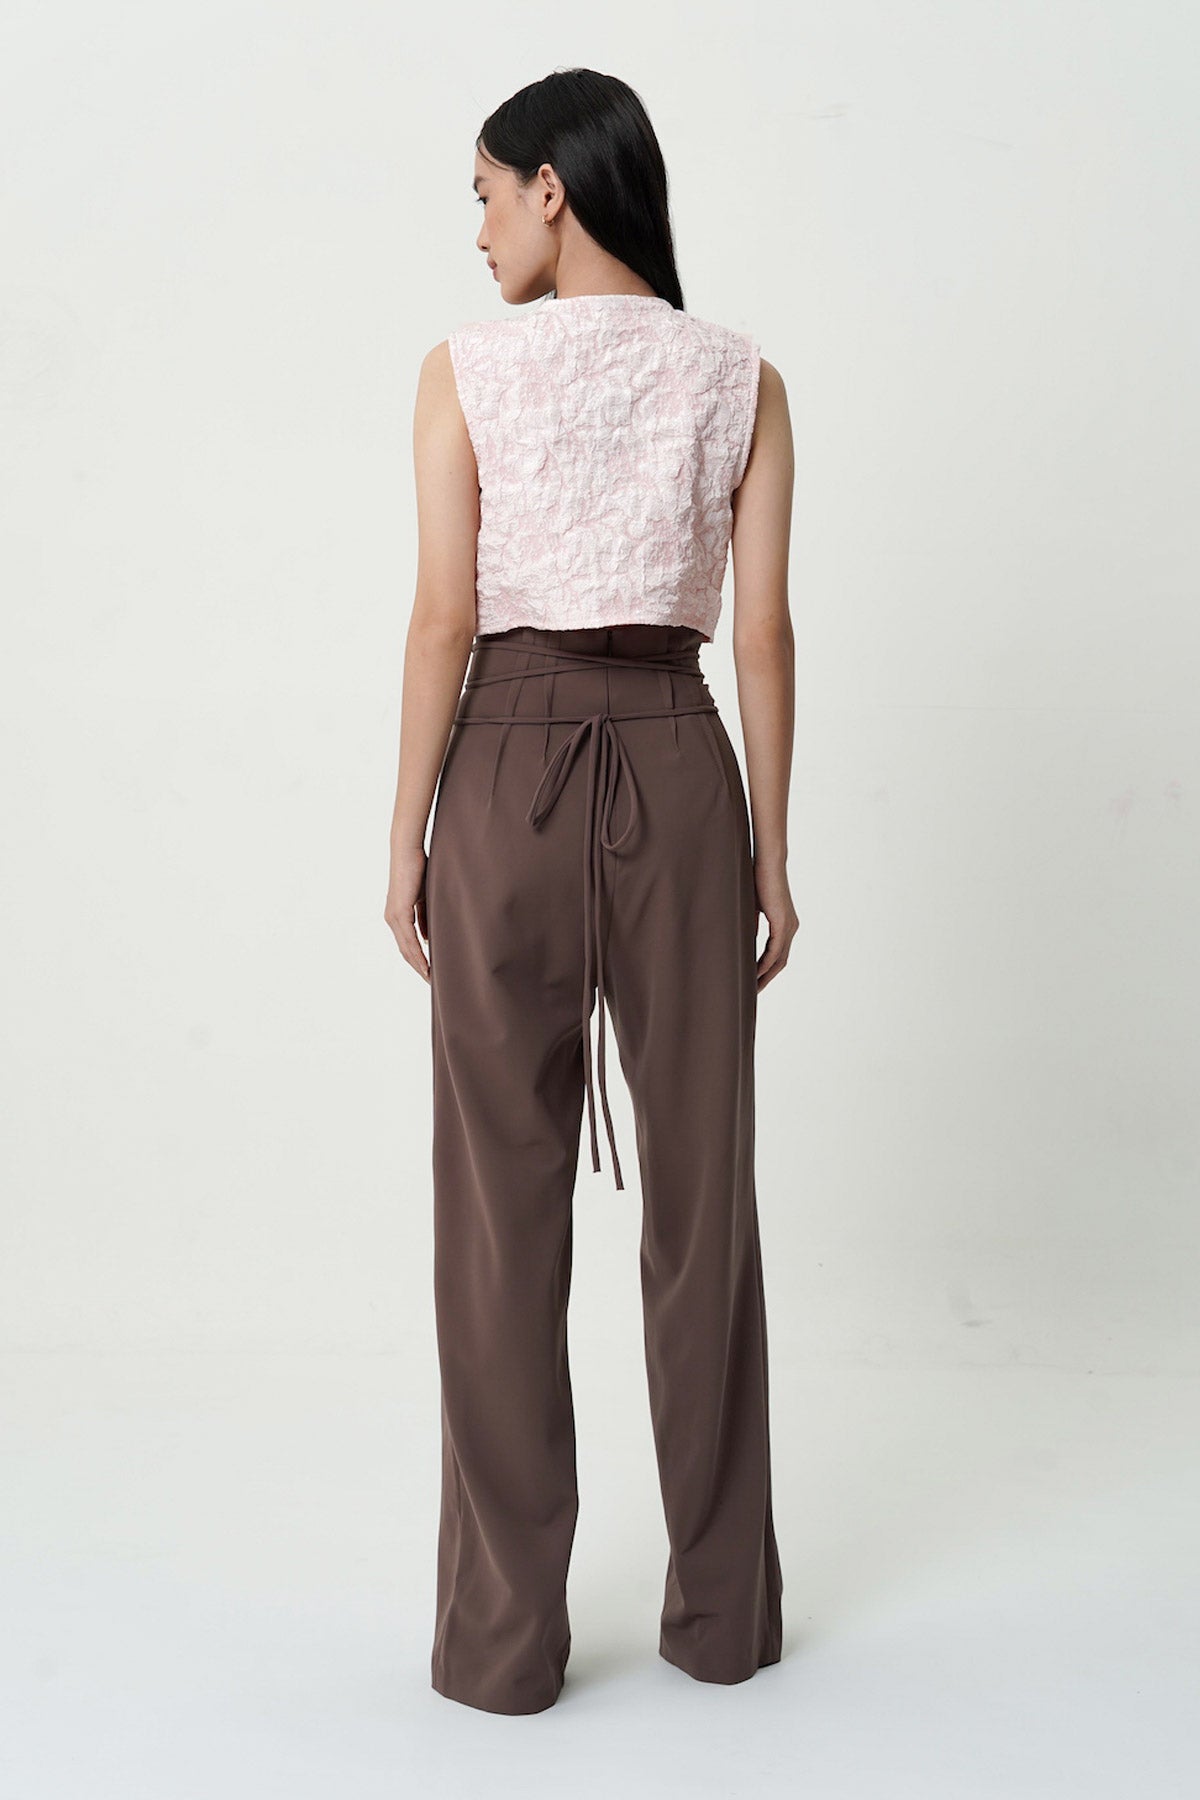 Noreen Pants In Mauve